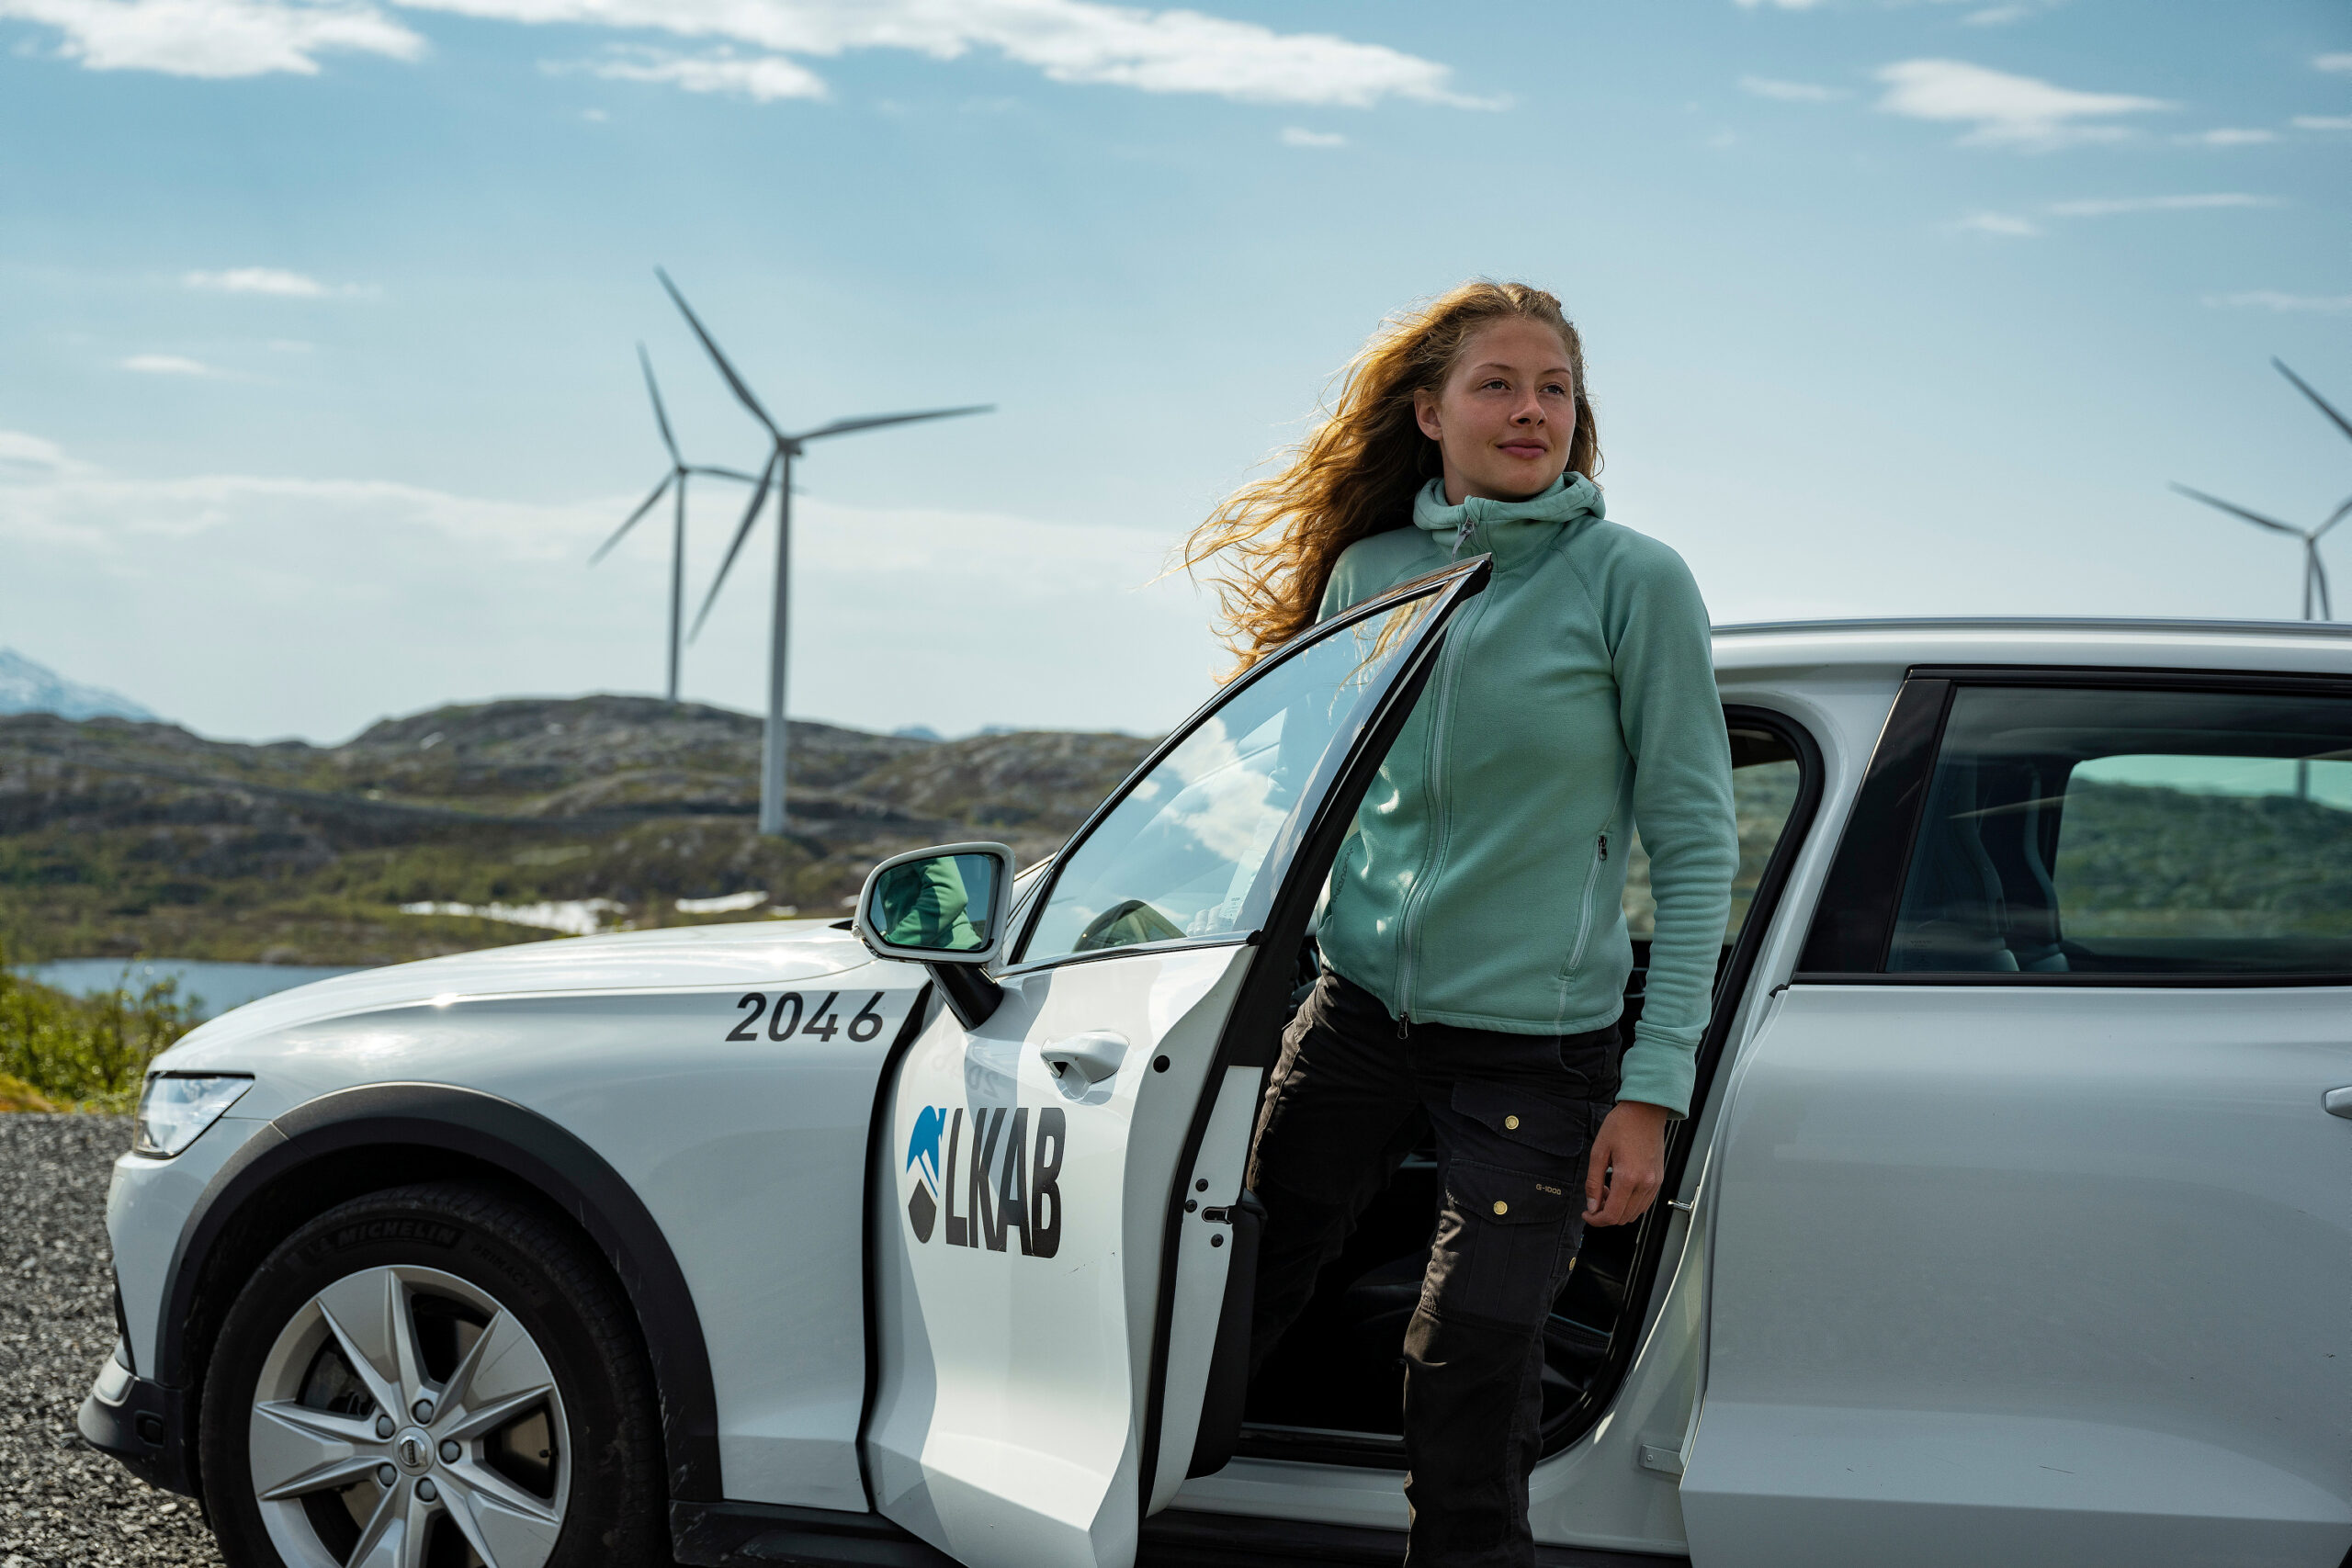 Woman getting out of car, with wind turbines in background